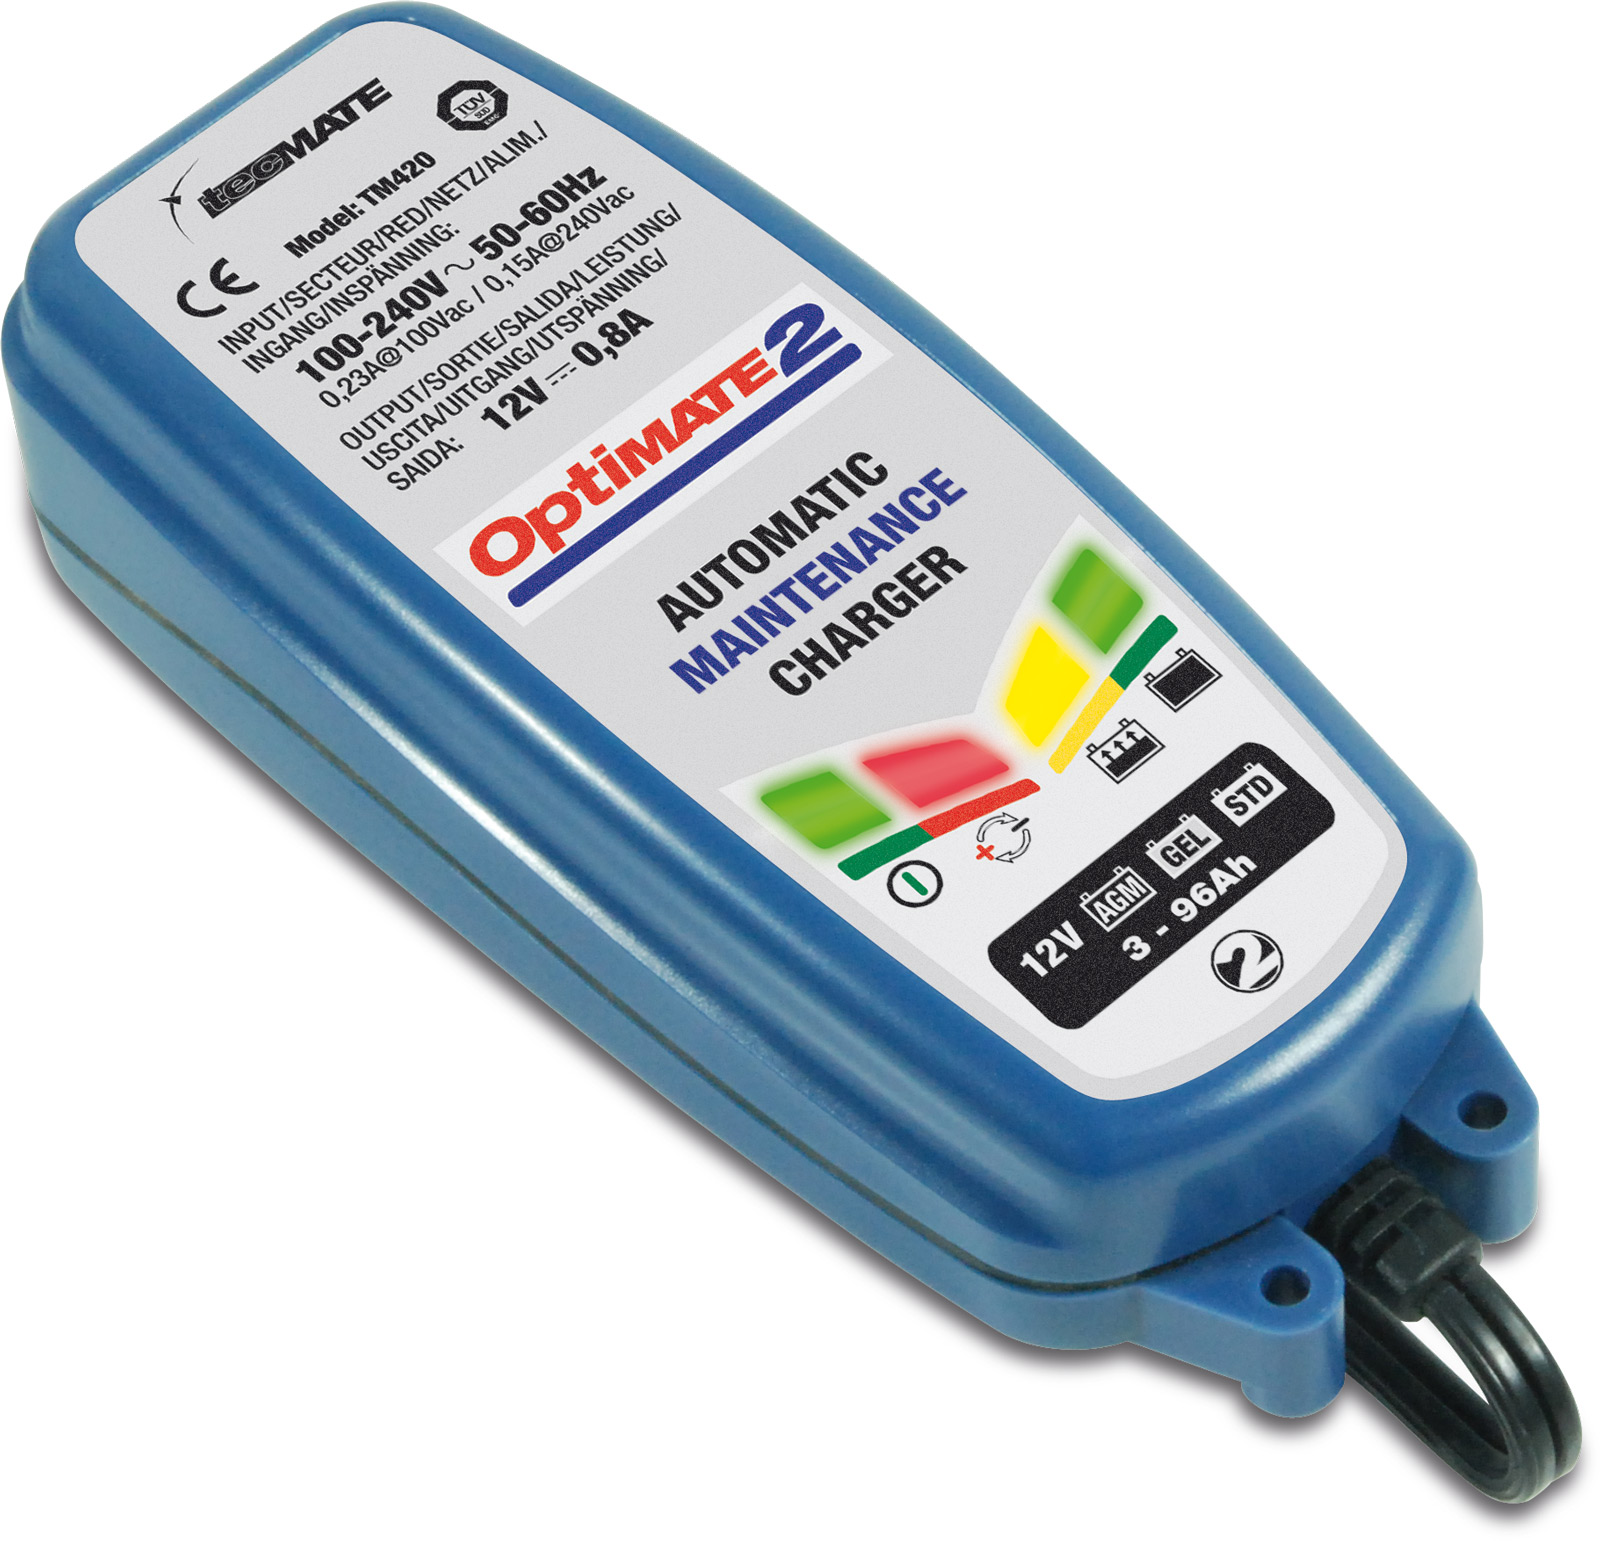 “OPTIMATE 2” BATTERY CHARGER